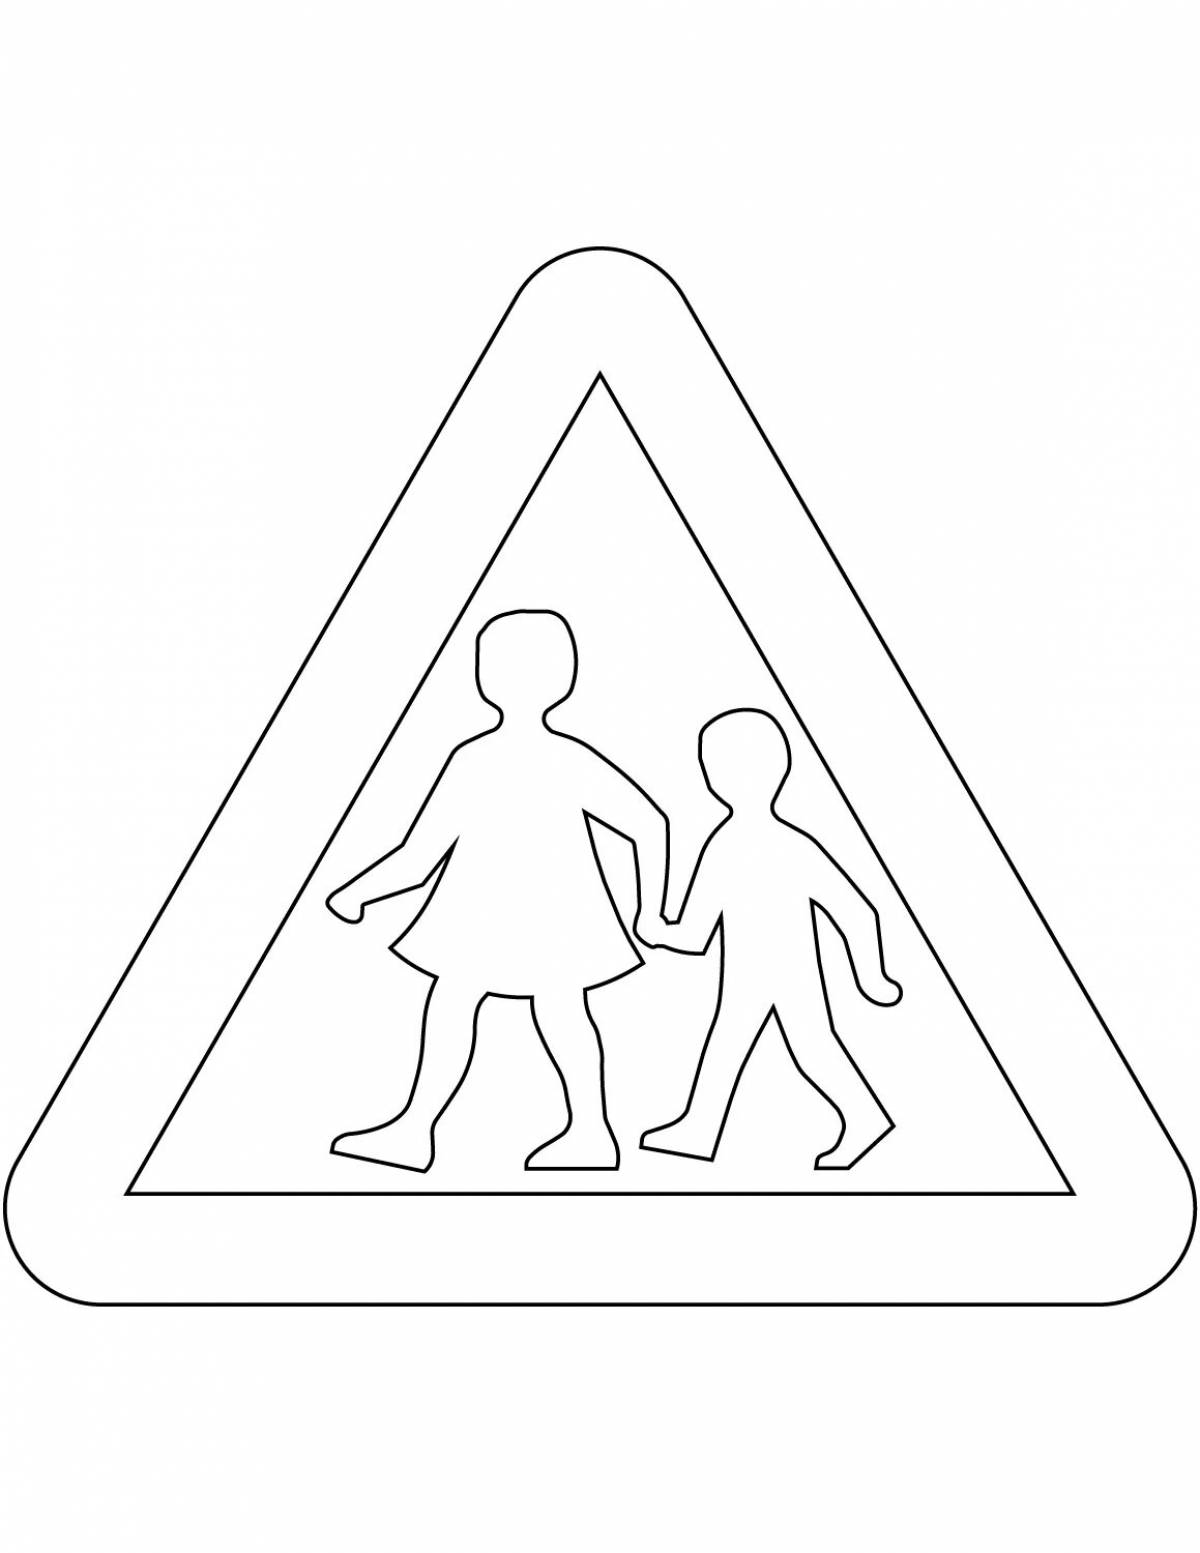 Fun coloring page of road signs